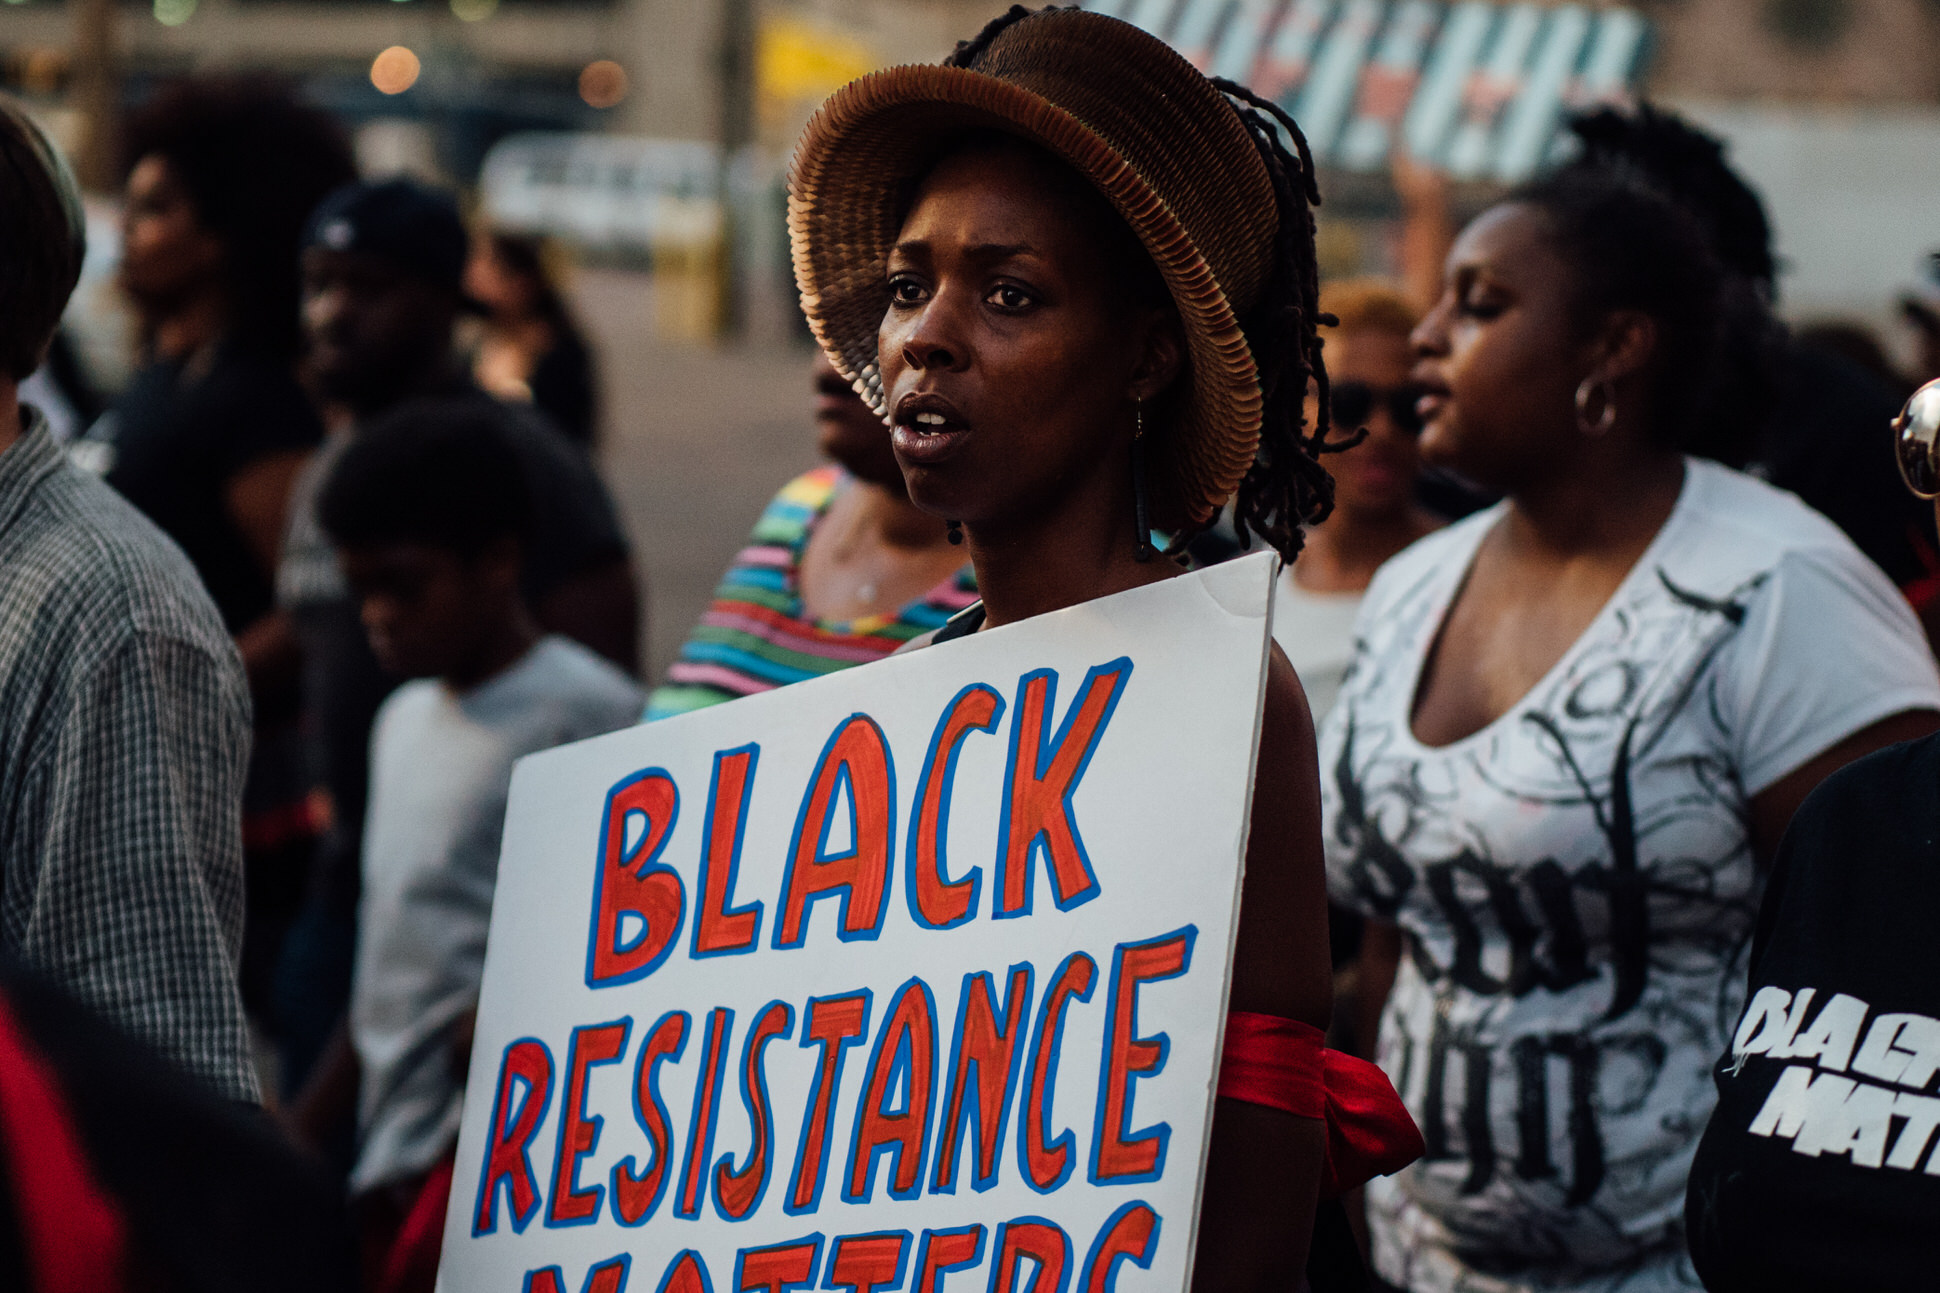 A participant of the BLM 5280 march holds a sign that reads "Black resistance Matters".